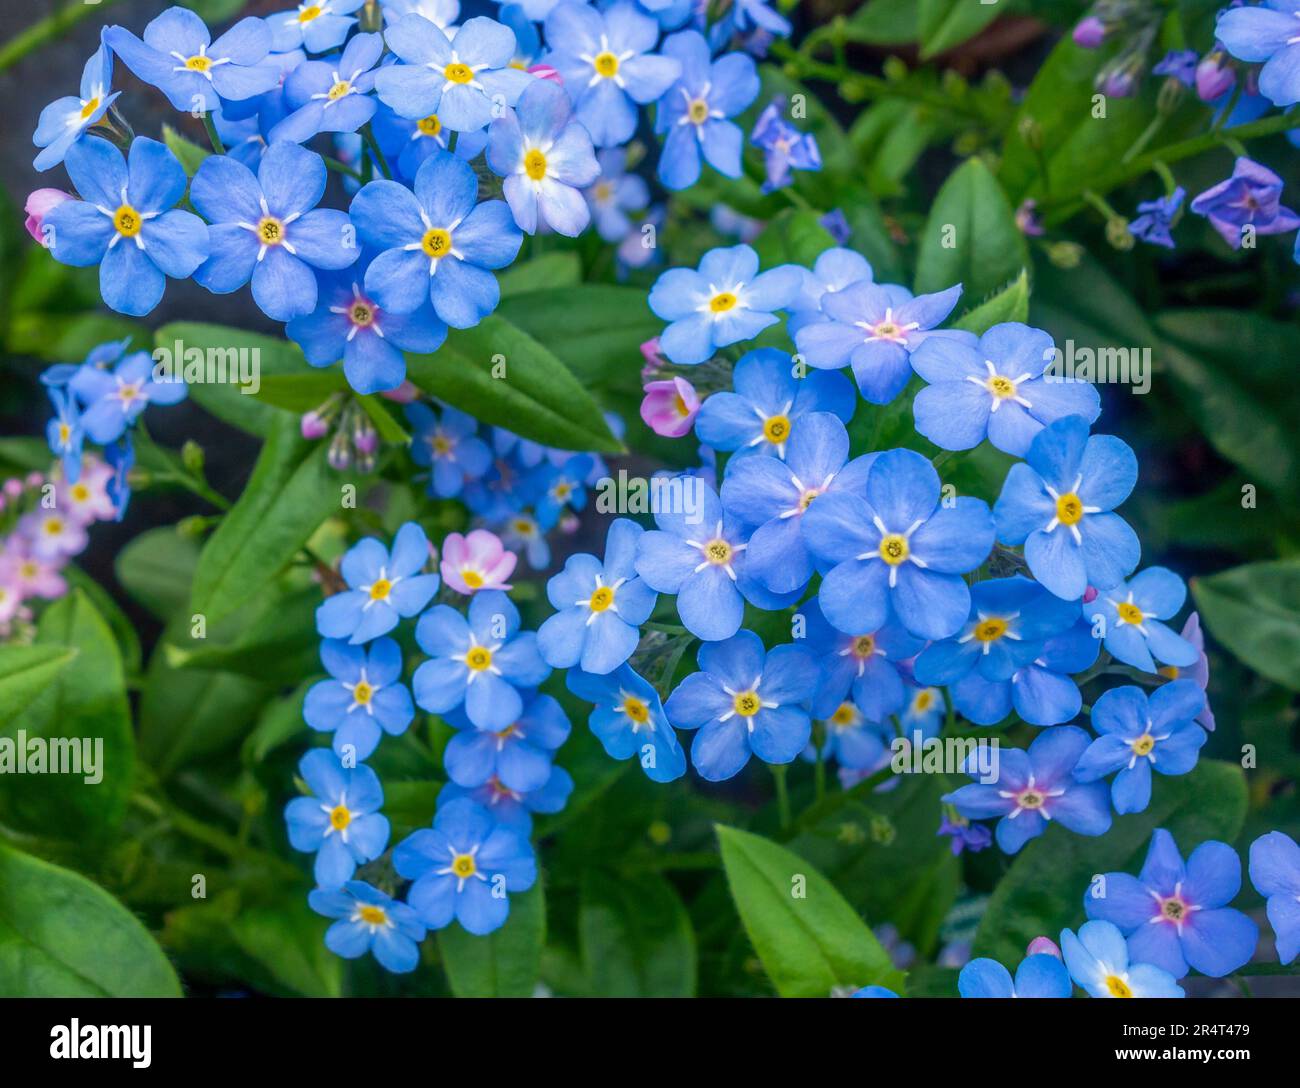 Blue forget me not flowers in natural ambiance Stock Photo